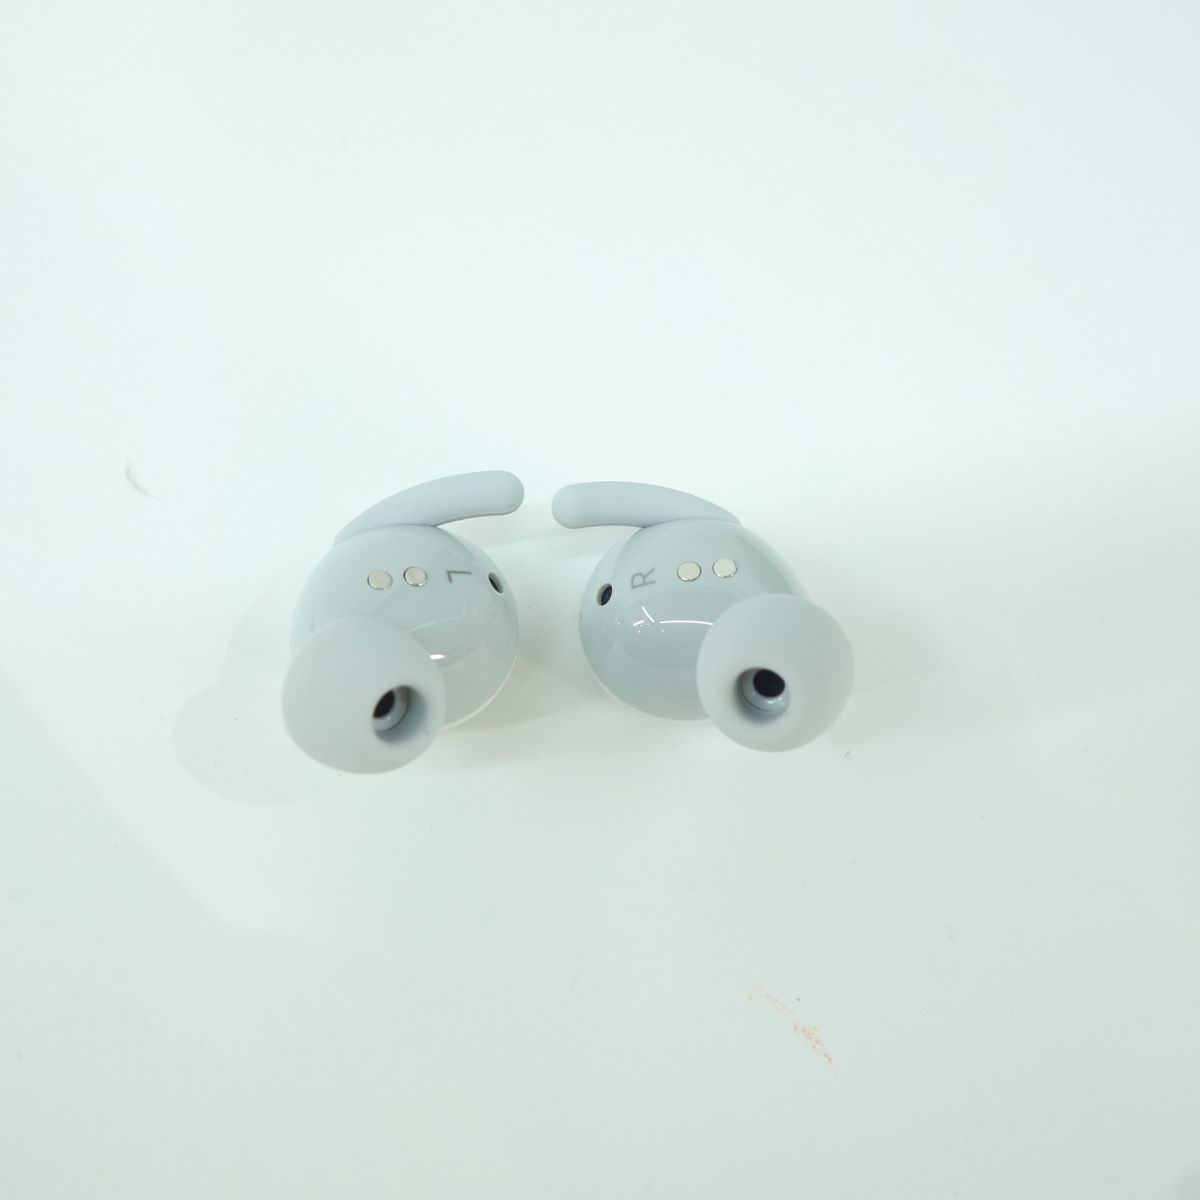 100 Google/グーグル pixel buds a-series Bluetoothイヤフォン Clearly White 完全ワイヤレスイヤホン ※中古_画像4